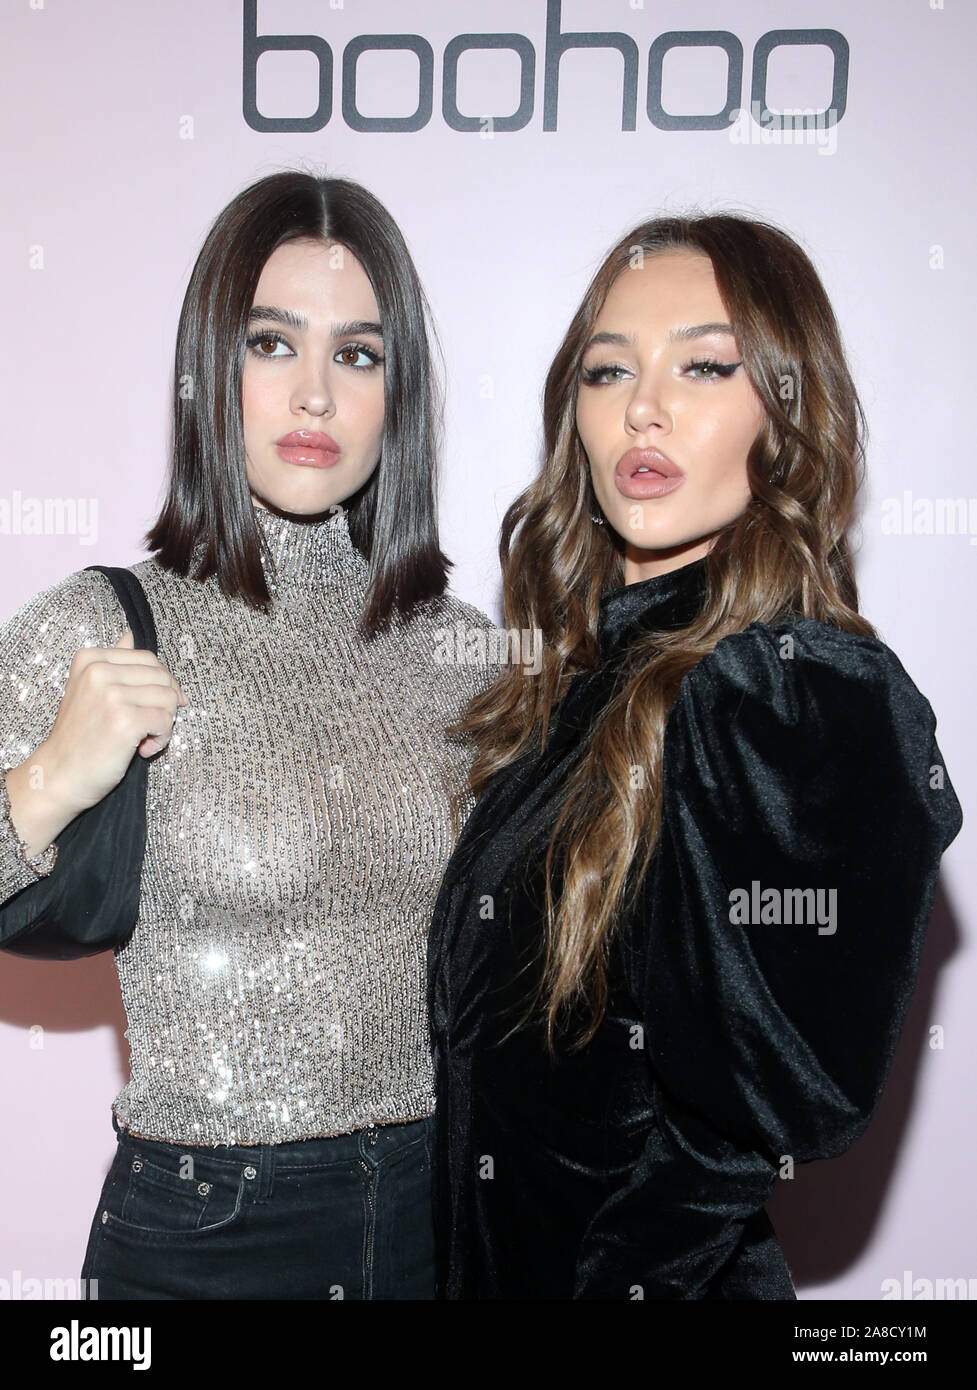 LOS ANGELES, CA - NOVEMBER 7: Amelia Gray, Delilah Belle Hamlin, at boohoo  x All That Glitters Launch Party at Nightingale in Los Angeles, California  on November 7, 2019. Credit Faye Sadou/MediaPunch